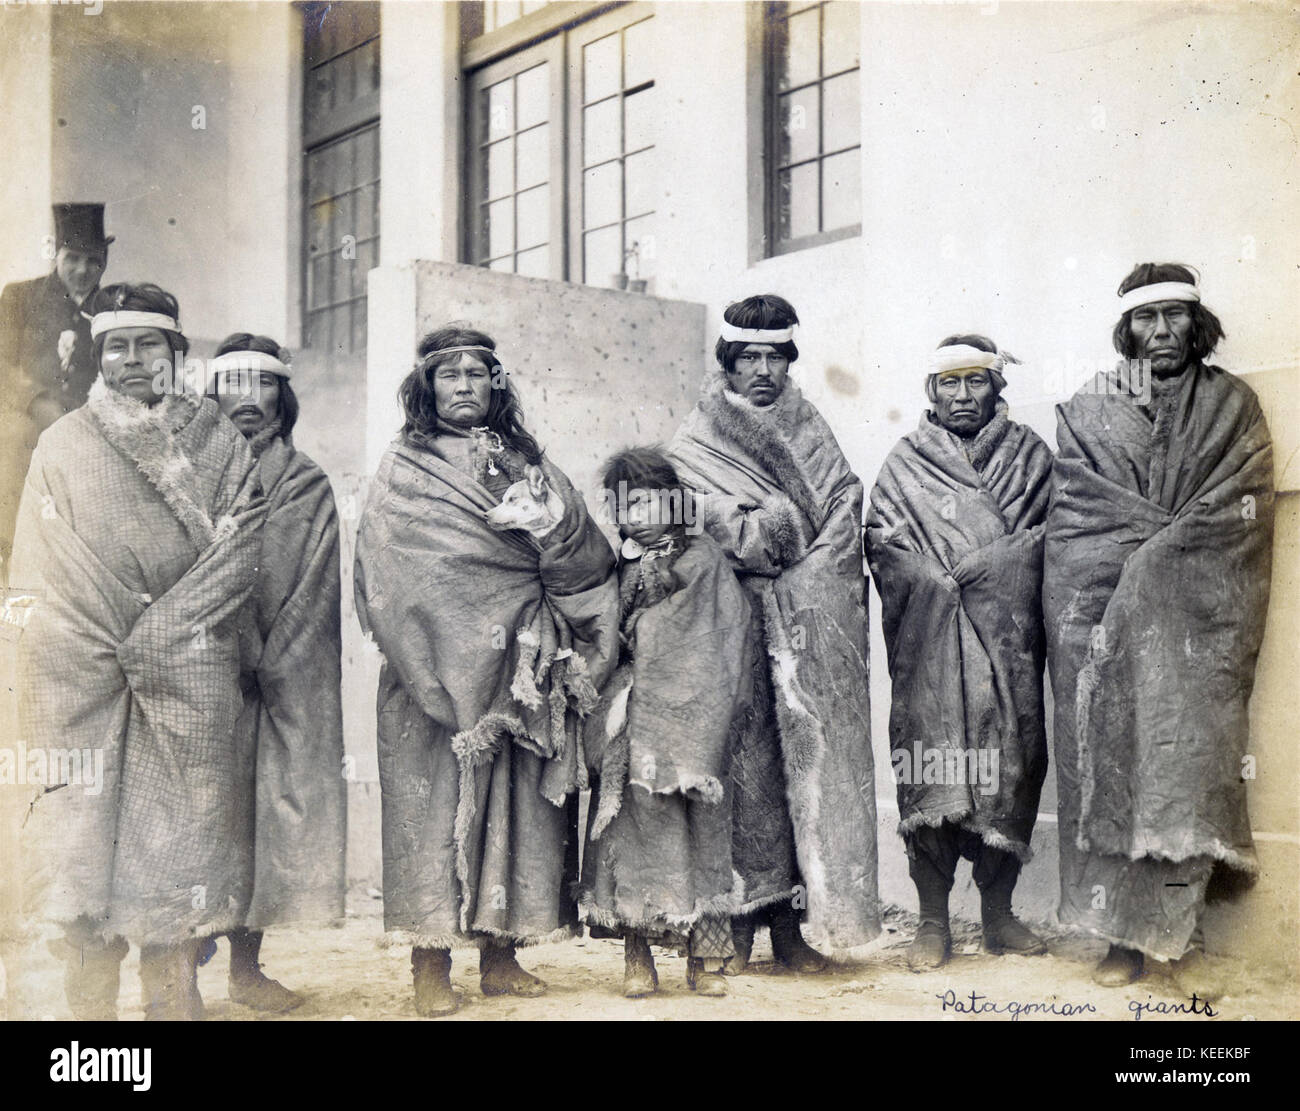 Patagonian Giants.  (Tehuelche Indians of Southern Argentina from the Department of Anthropology at the 1904 World's Fair Stock Photo